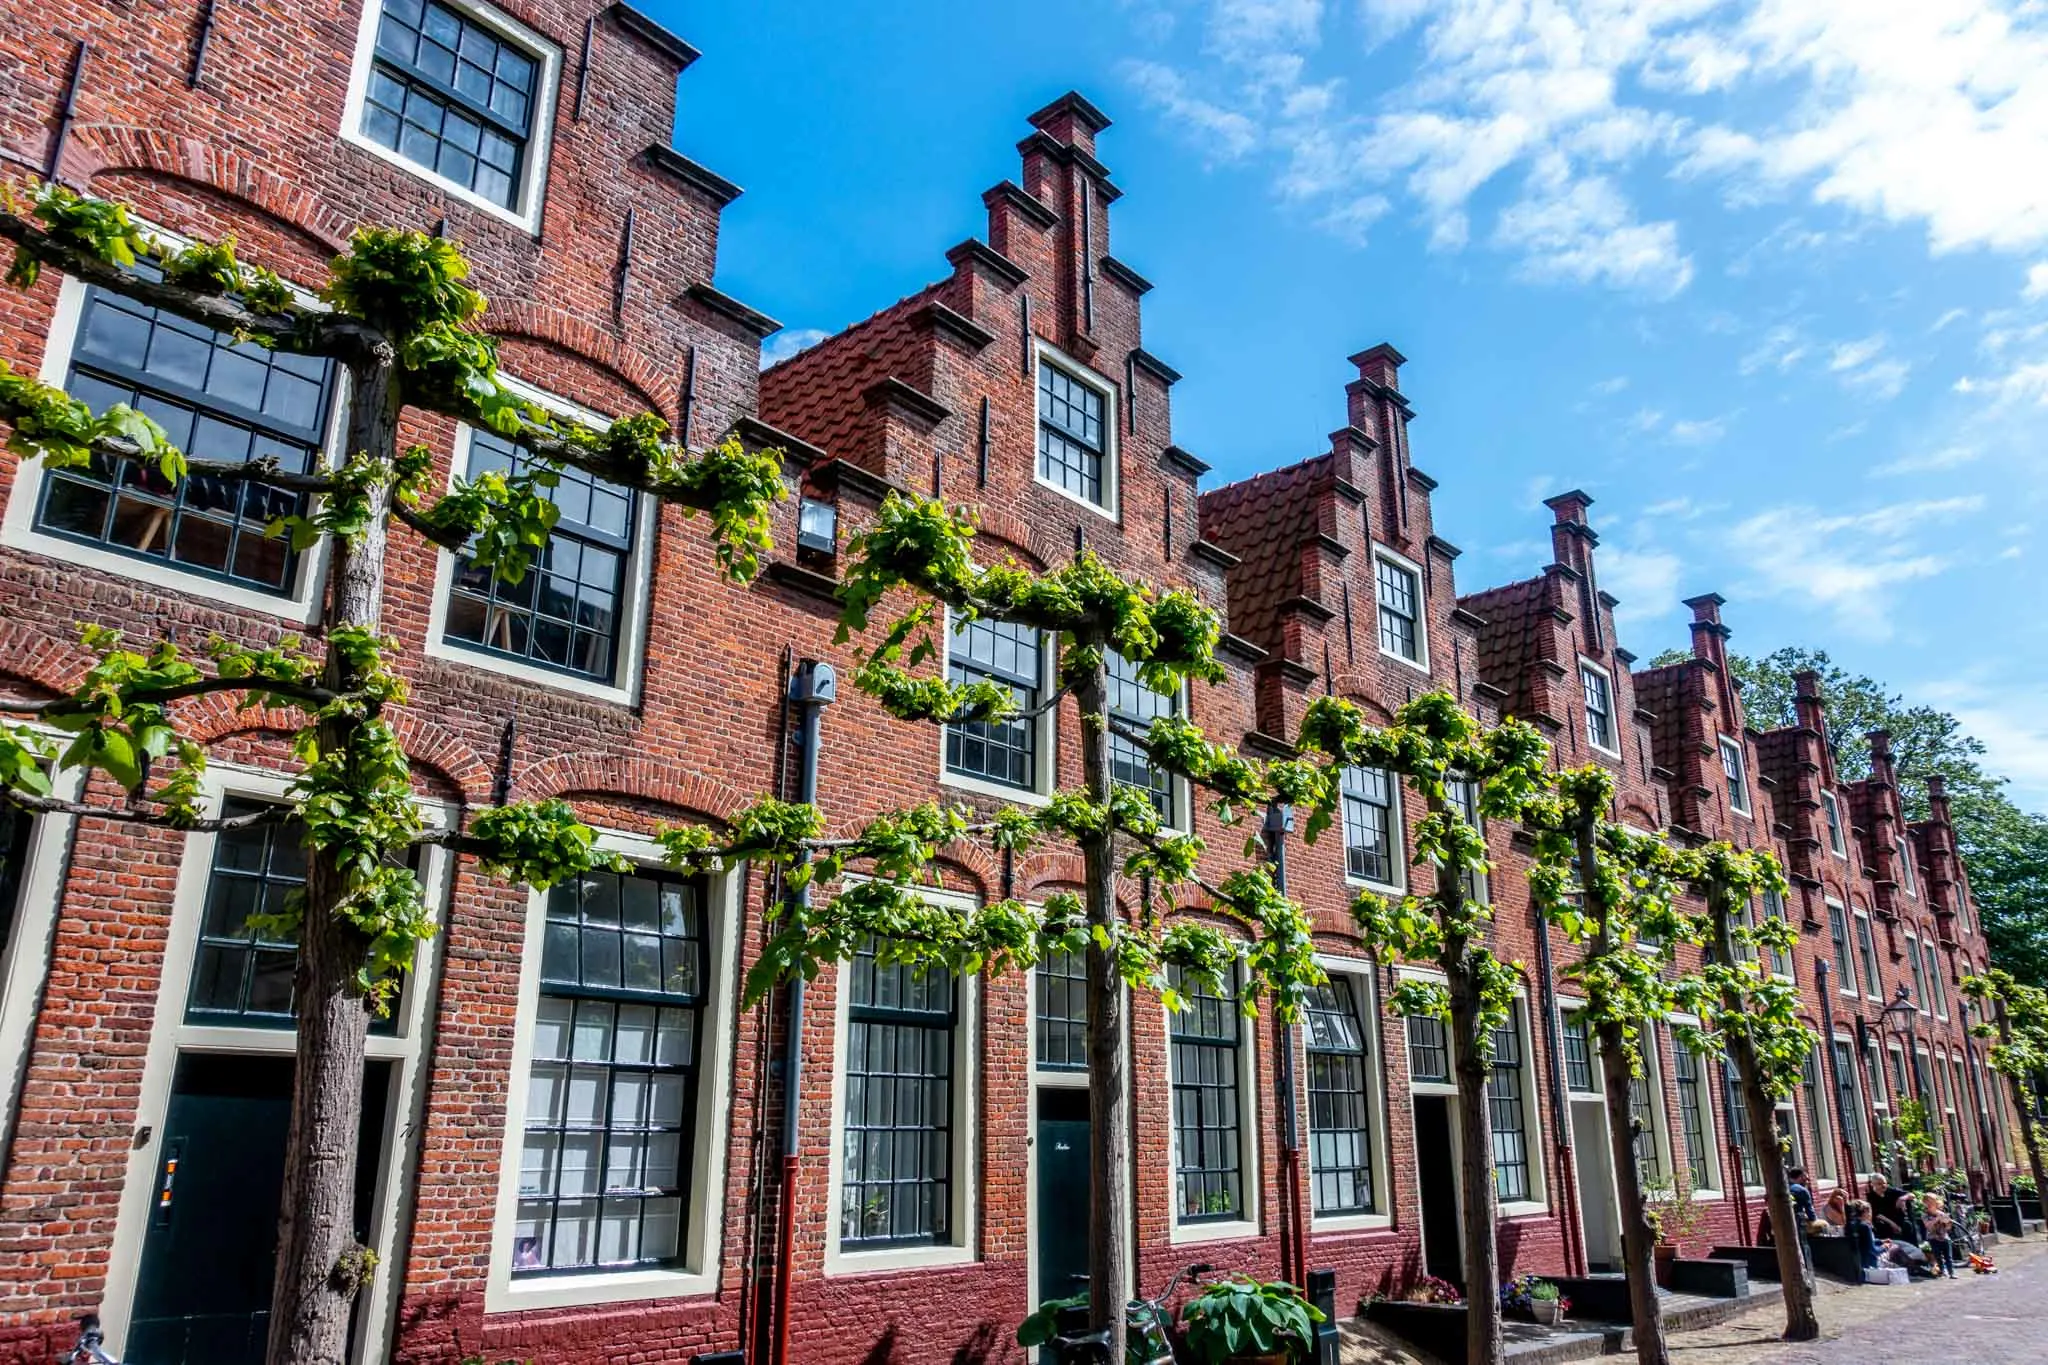 Row of red brick Dutch houses with step gabled roofs